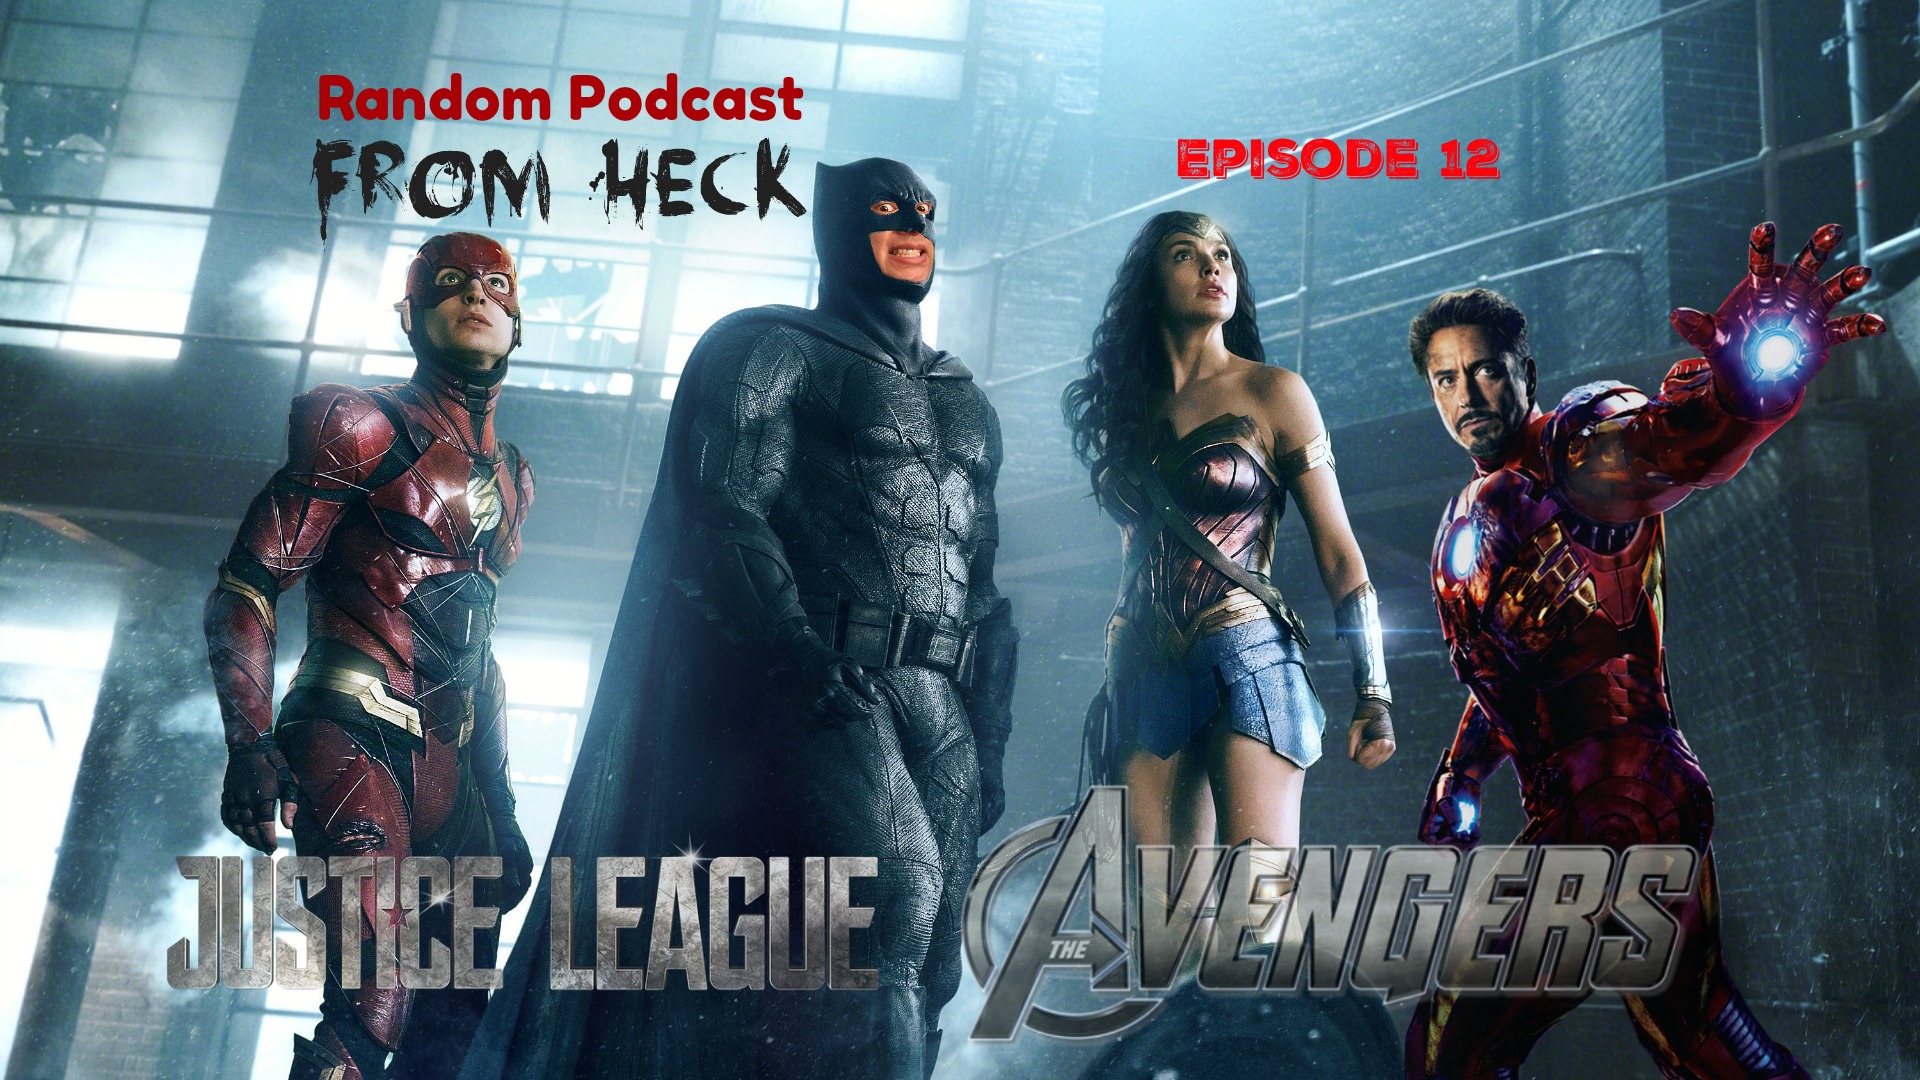 Episode 12: Justice League, Avengers, The Punisher, And More